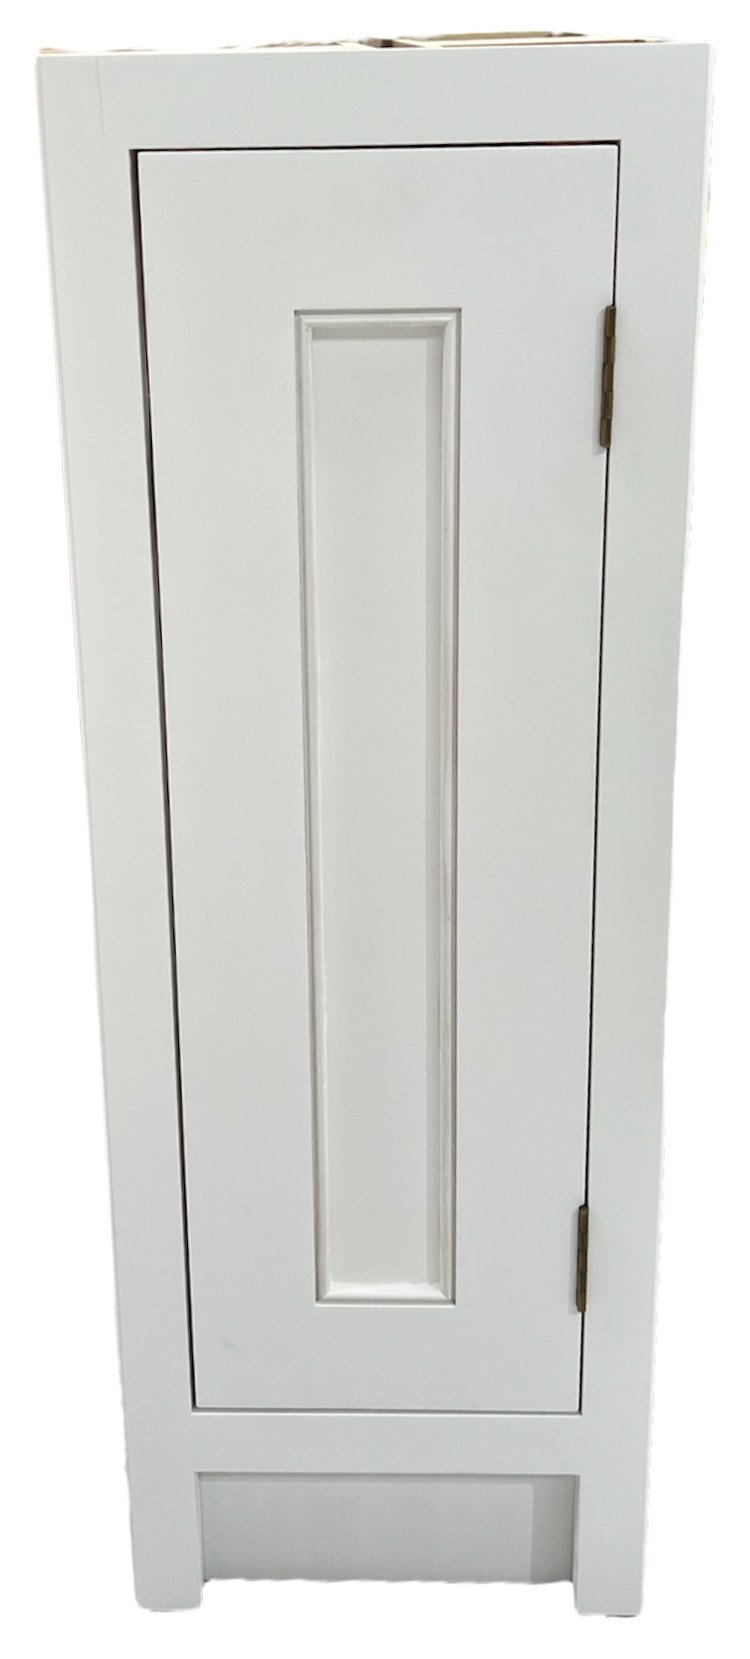 BH 300 - 300mm Highline single door base unit - Classic Kitchens Direct